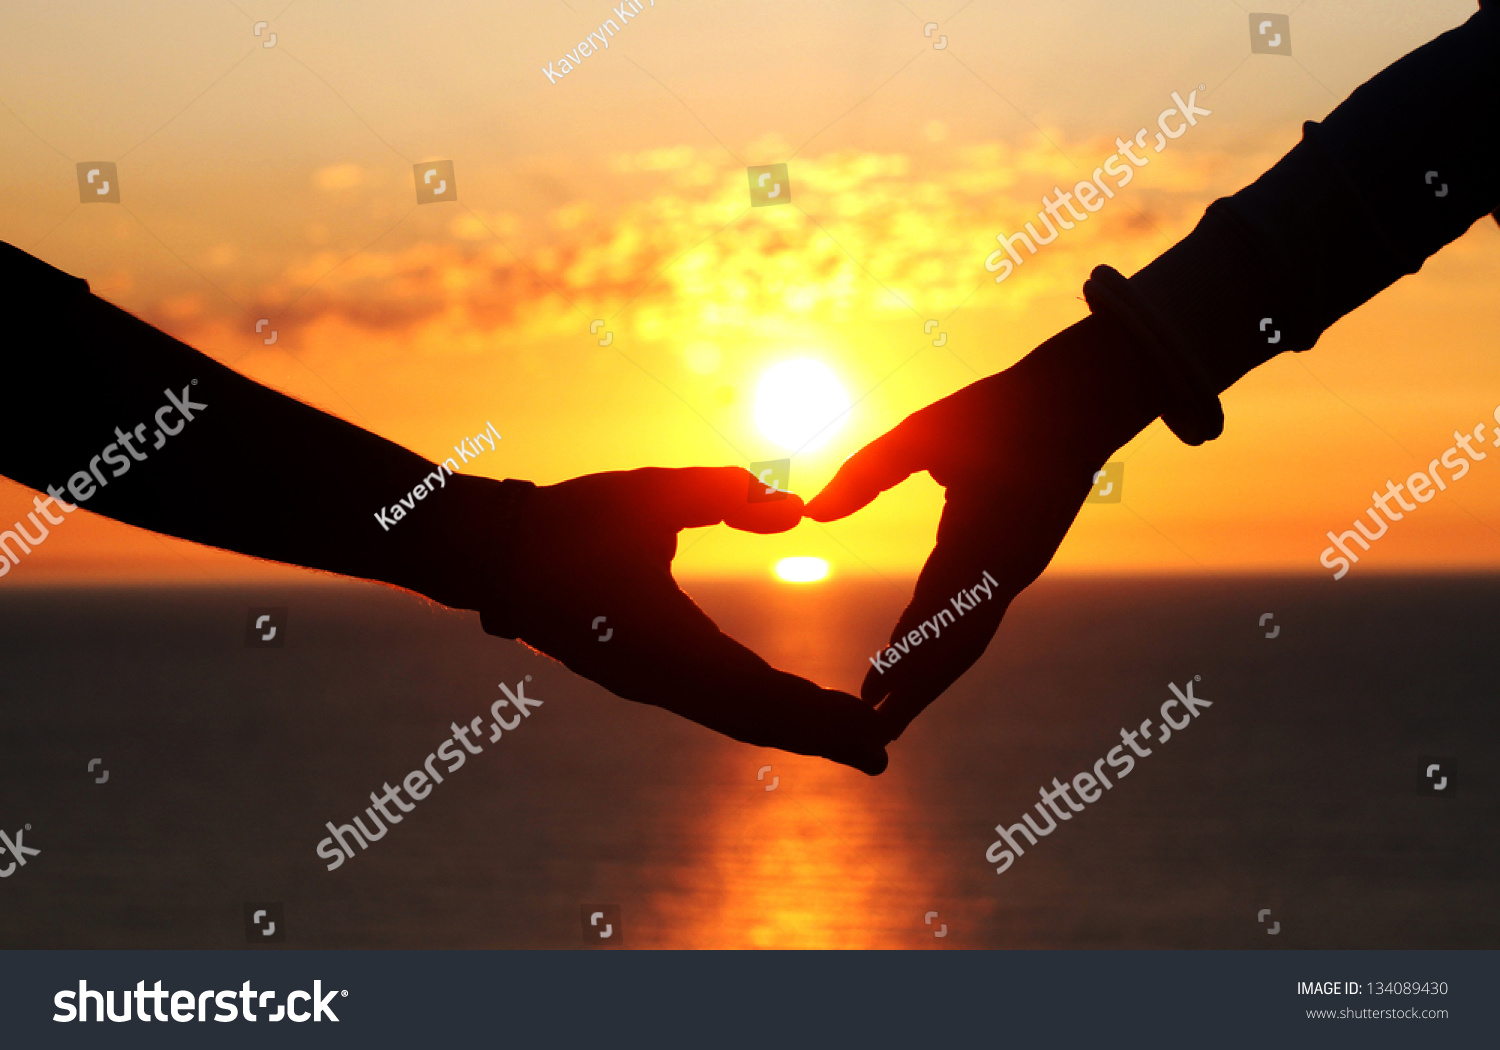 Two Hands Lovers On Background Sunset Stock Photo 134089430